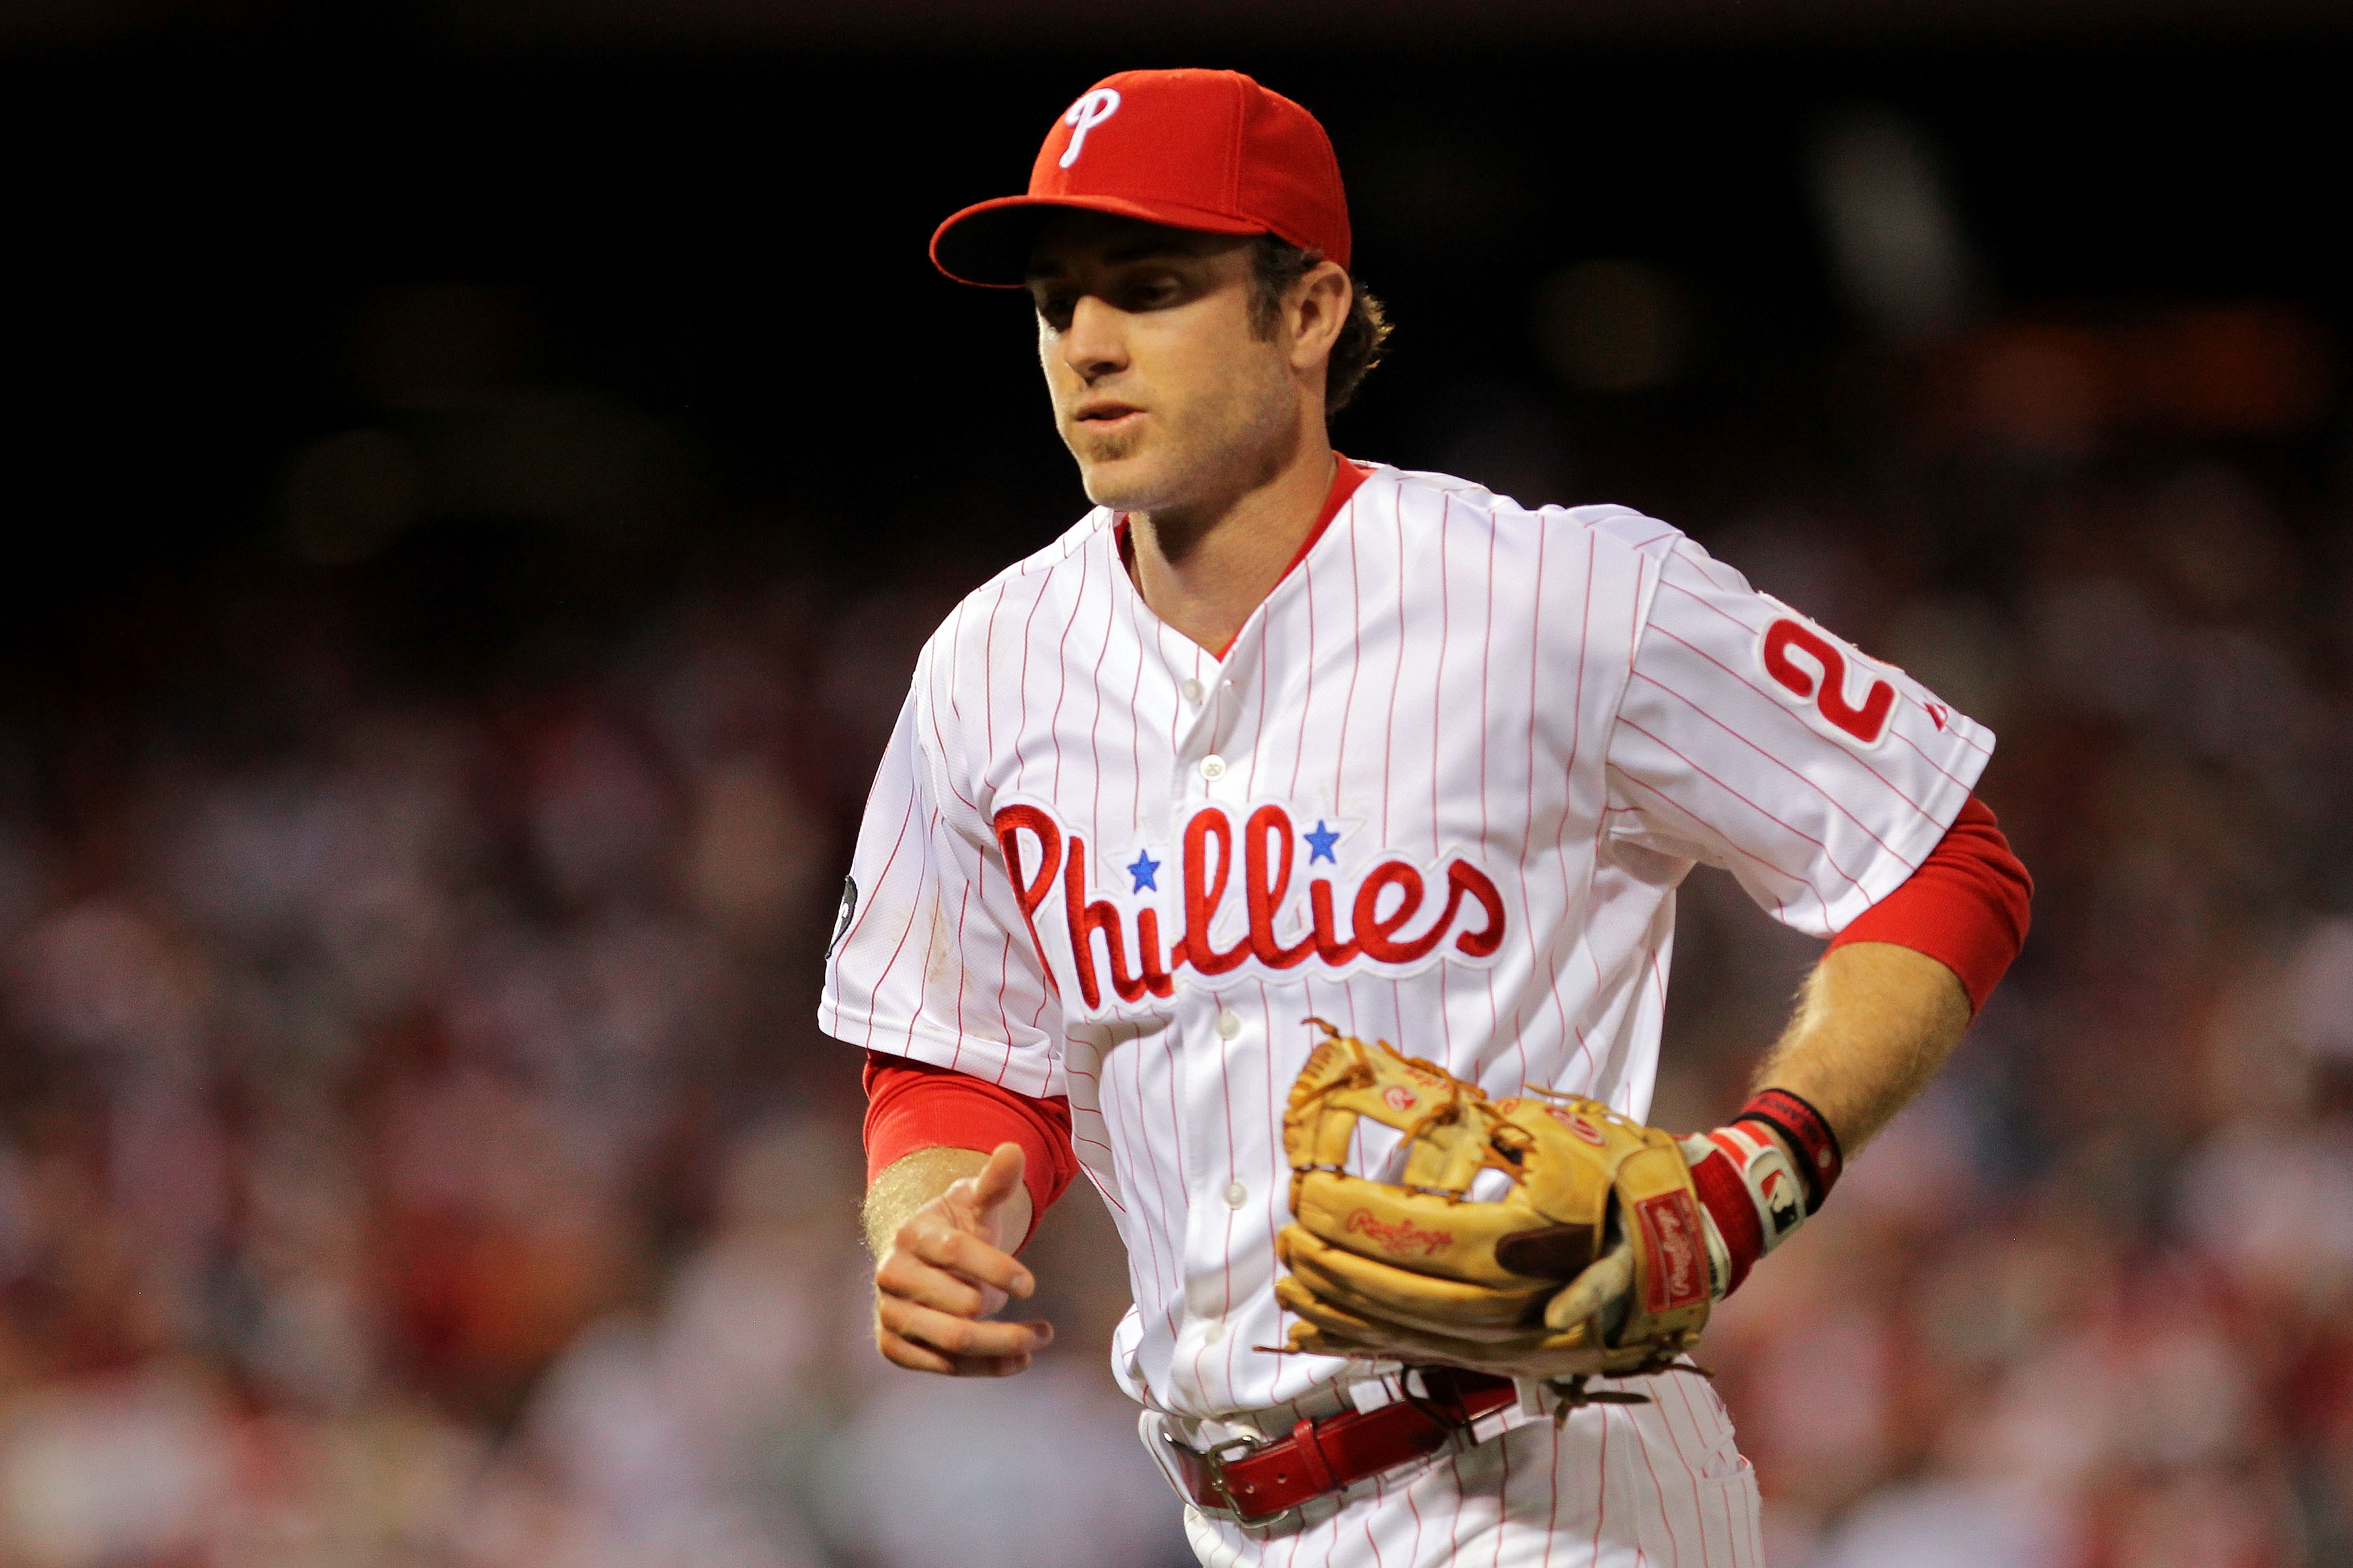 PHILADELPHIA - OCTOBER 23:  Chase Utley #26 of the Philadelphia Phillies runs off the field after turing a double play against the San Francisco Giants in Game Six of the NLCS during the 2010 MLB Playoffs at Citizens Bank Park on October 23, 2010 in Phila